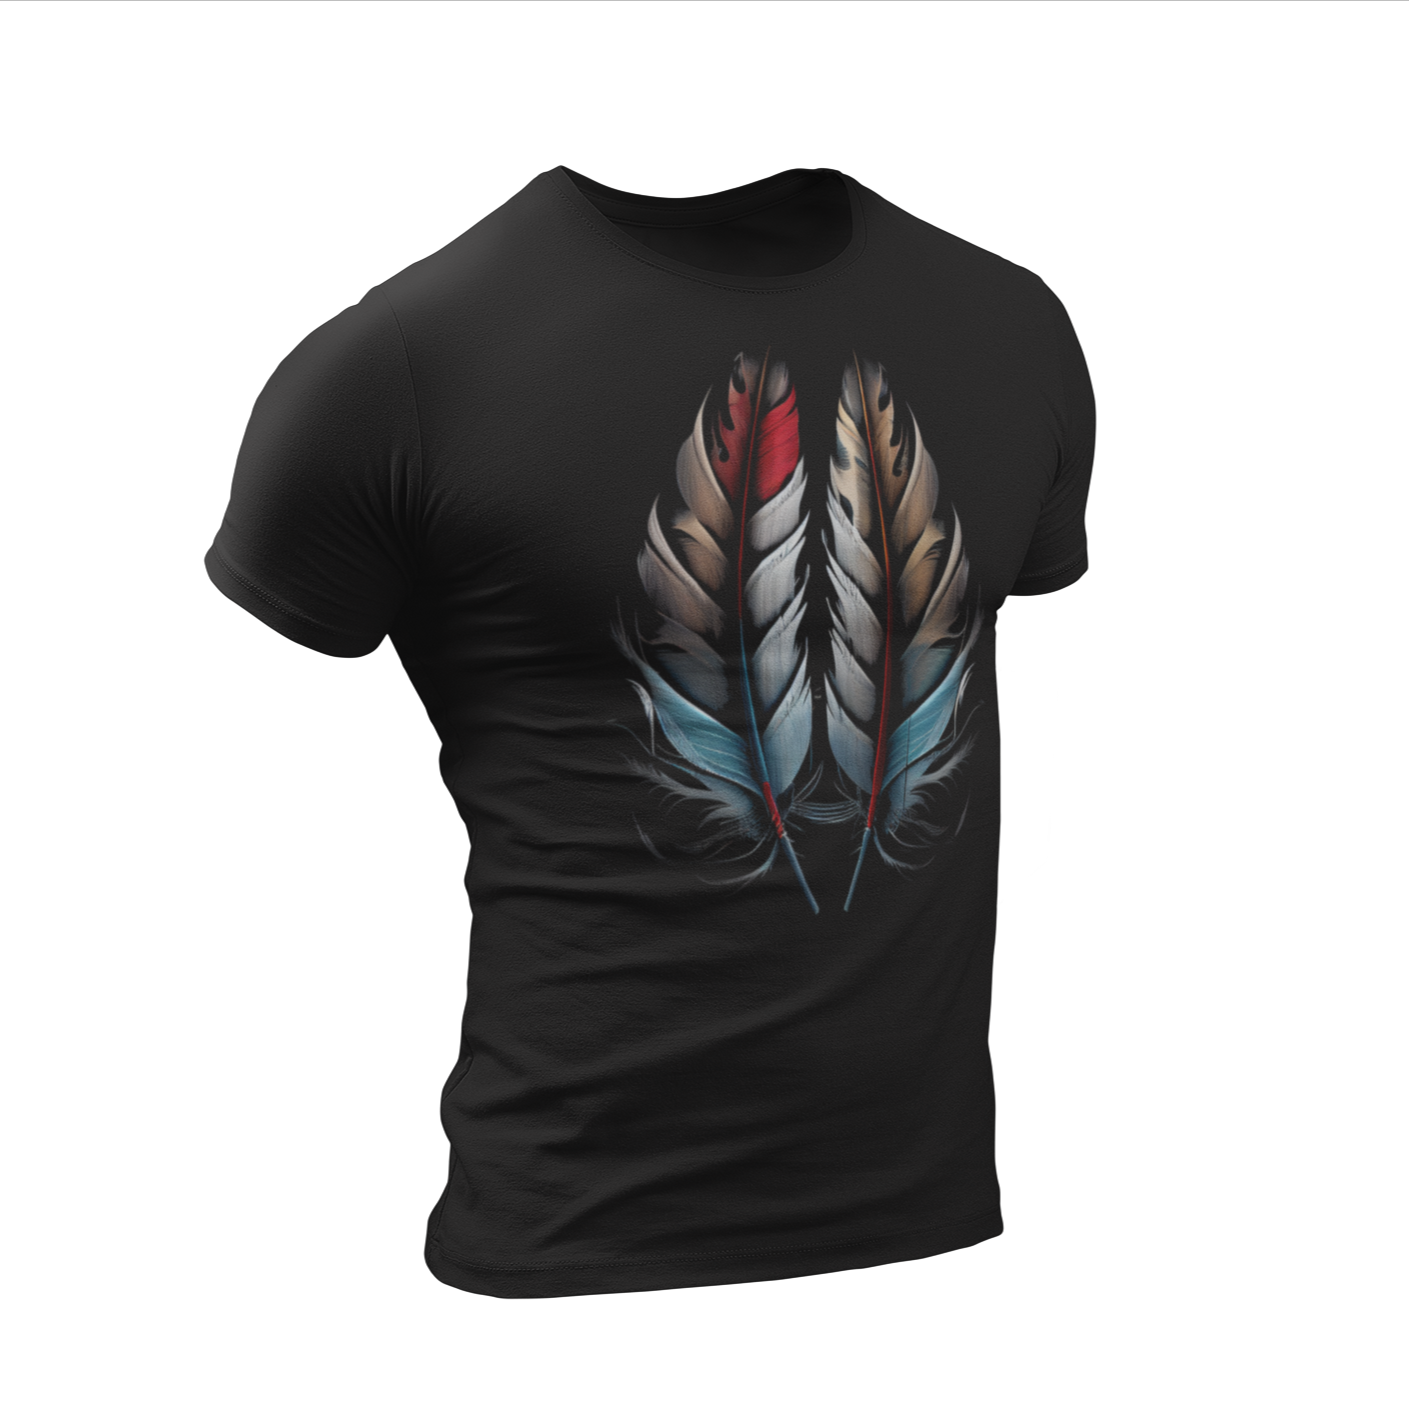 Black Tribal Feathers shirt by Made Inc 